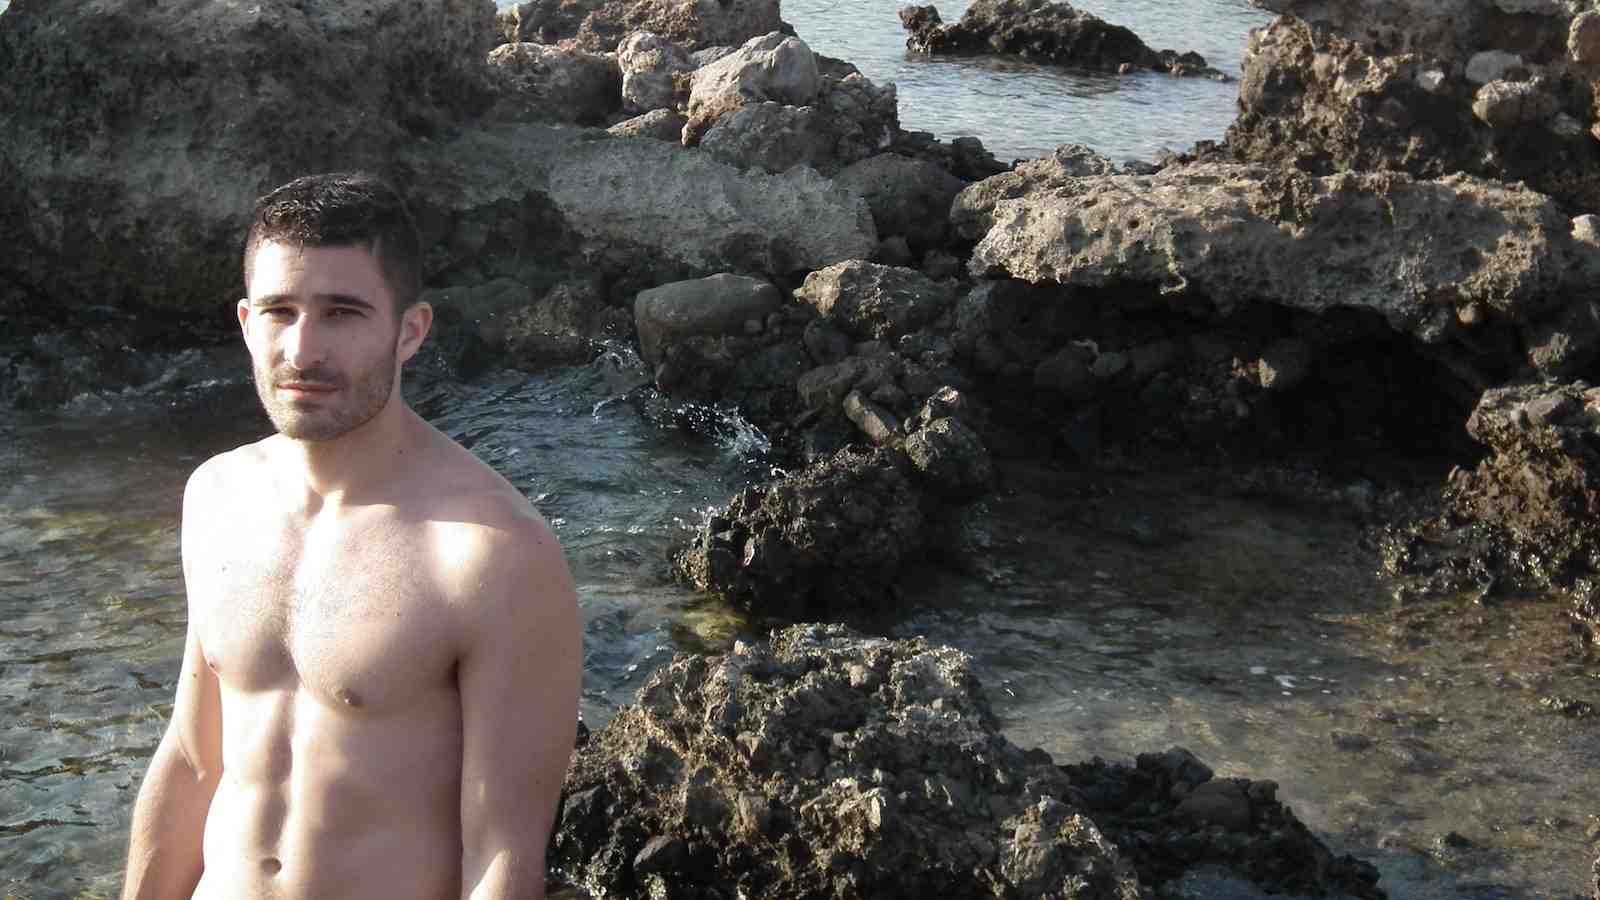 There are three fabulous gay beaches in Crete to check out